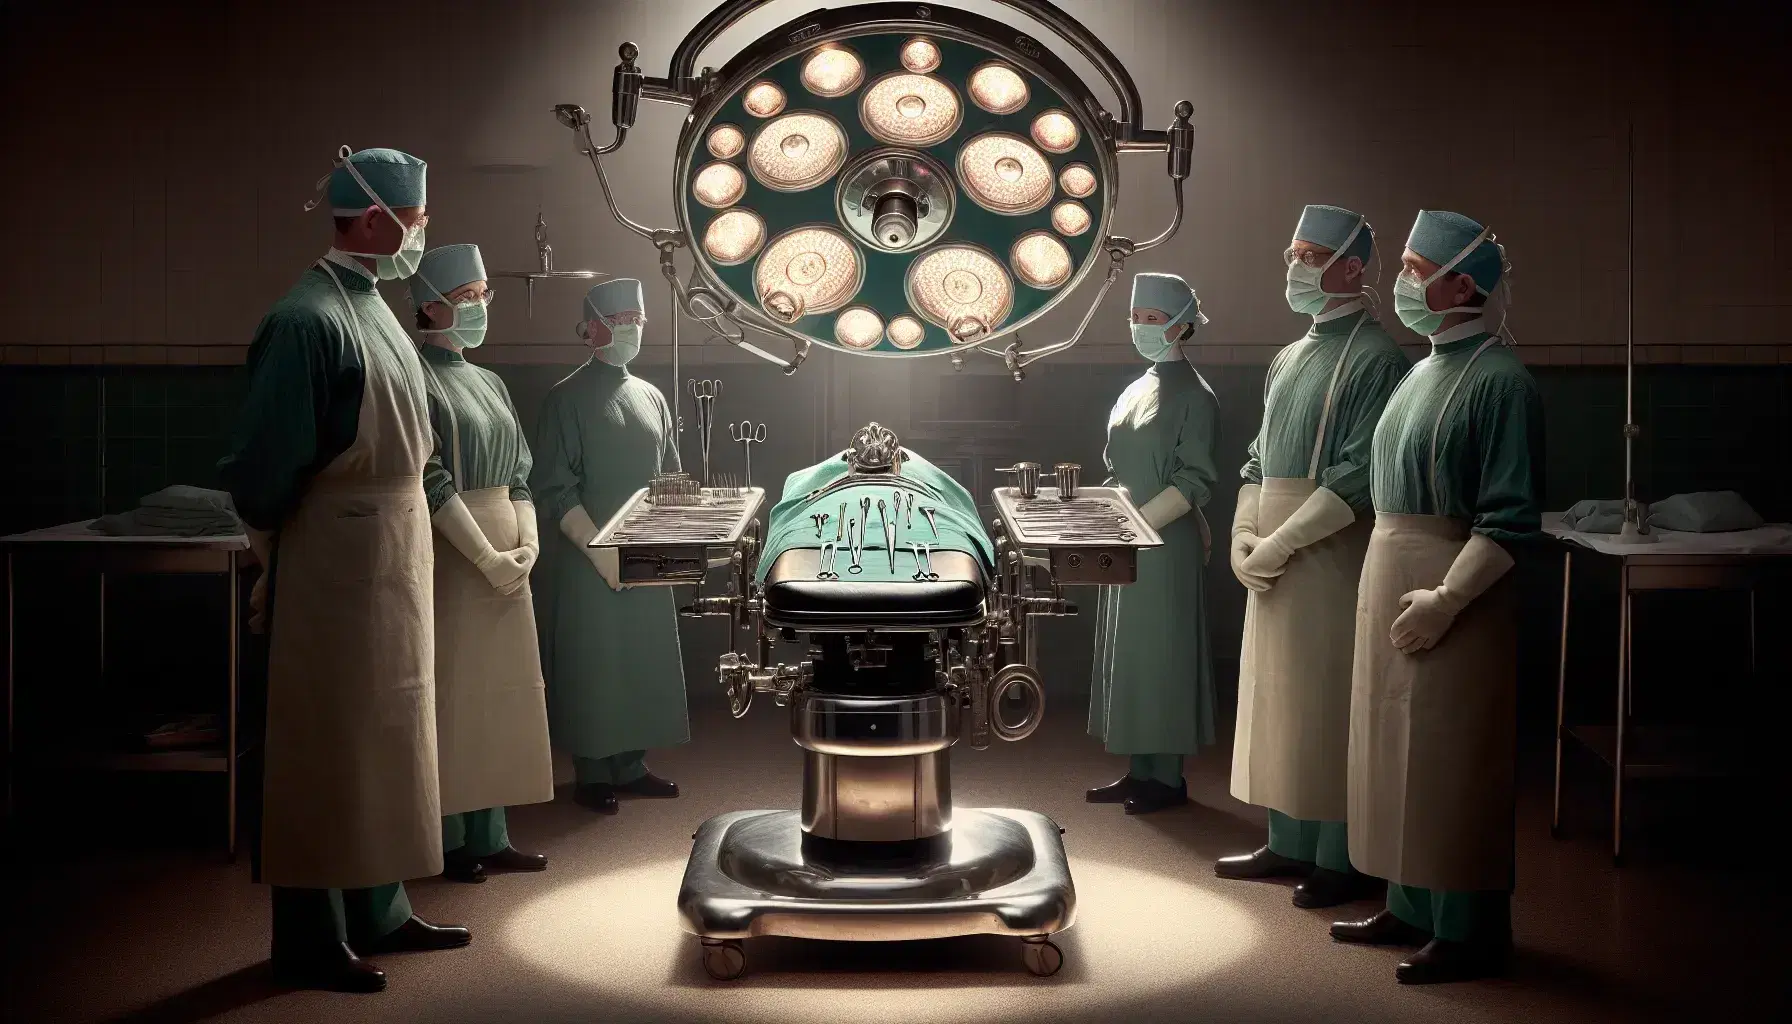 Vintage operating room with steel surgical table, articulated lamp and four surgeons in green coats ready for surgery.